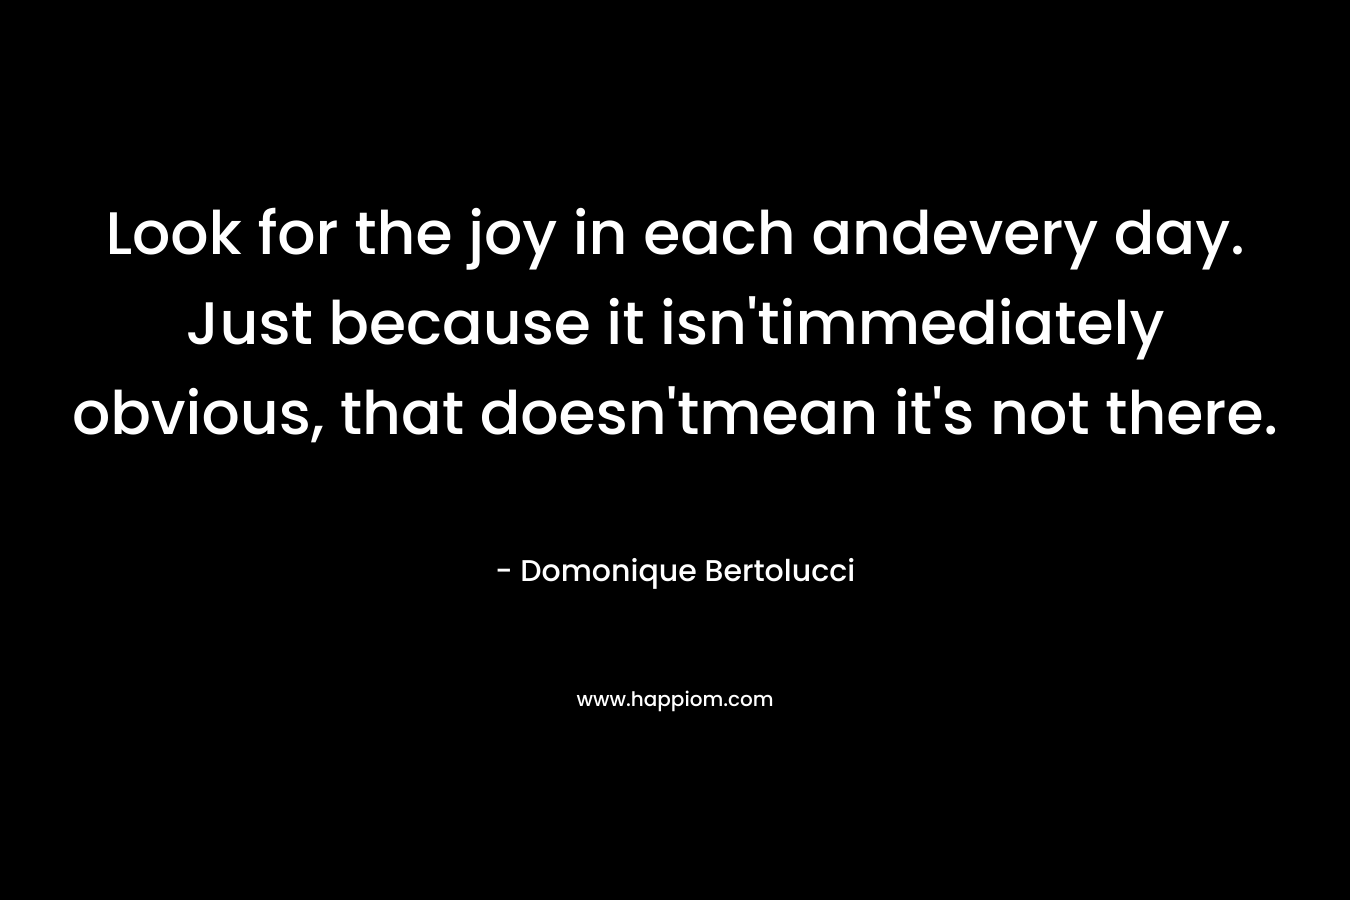 Look for the joy in each andevery day. Just because it isn'timmediately obvious, that doesn'tmean it's not there.